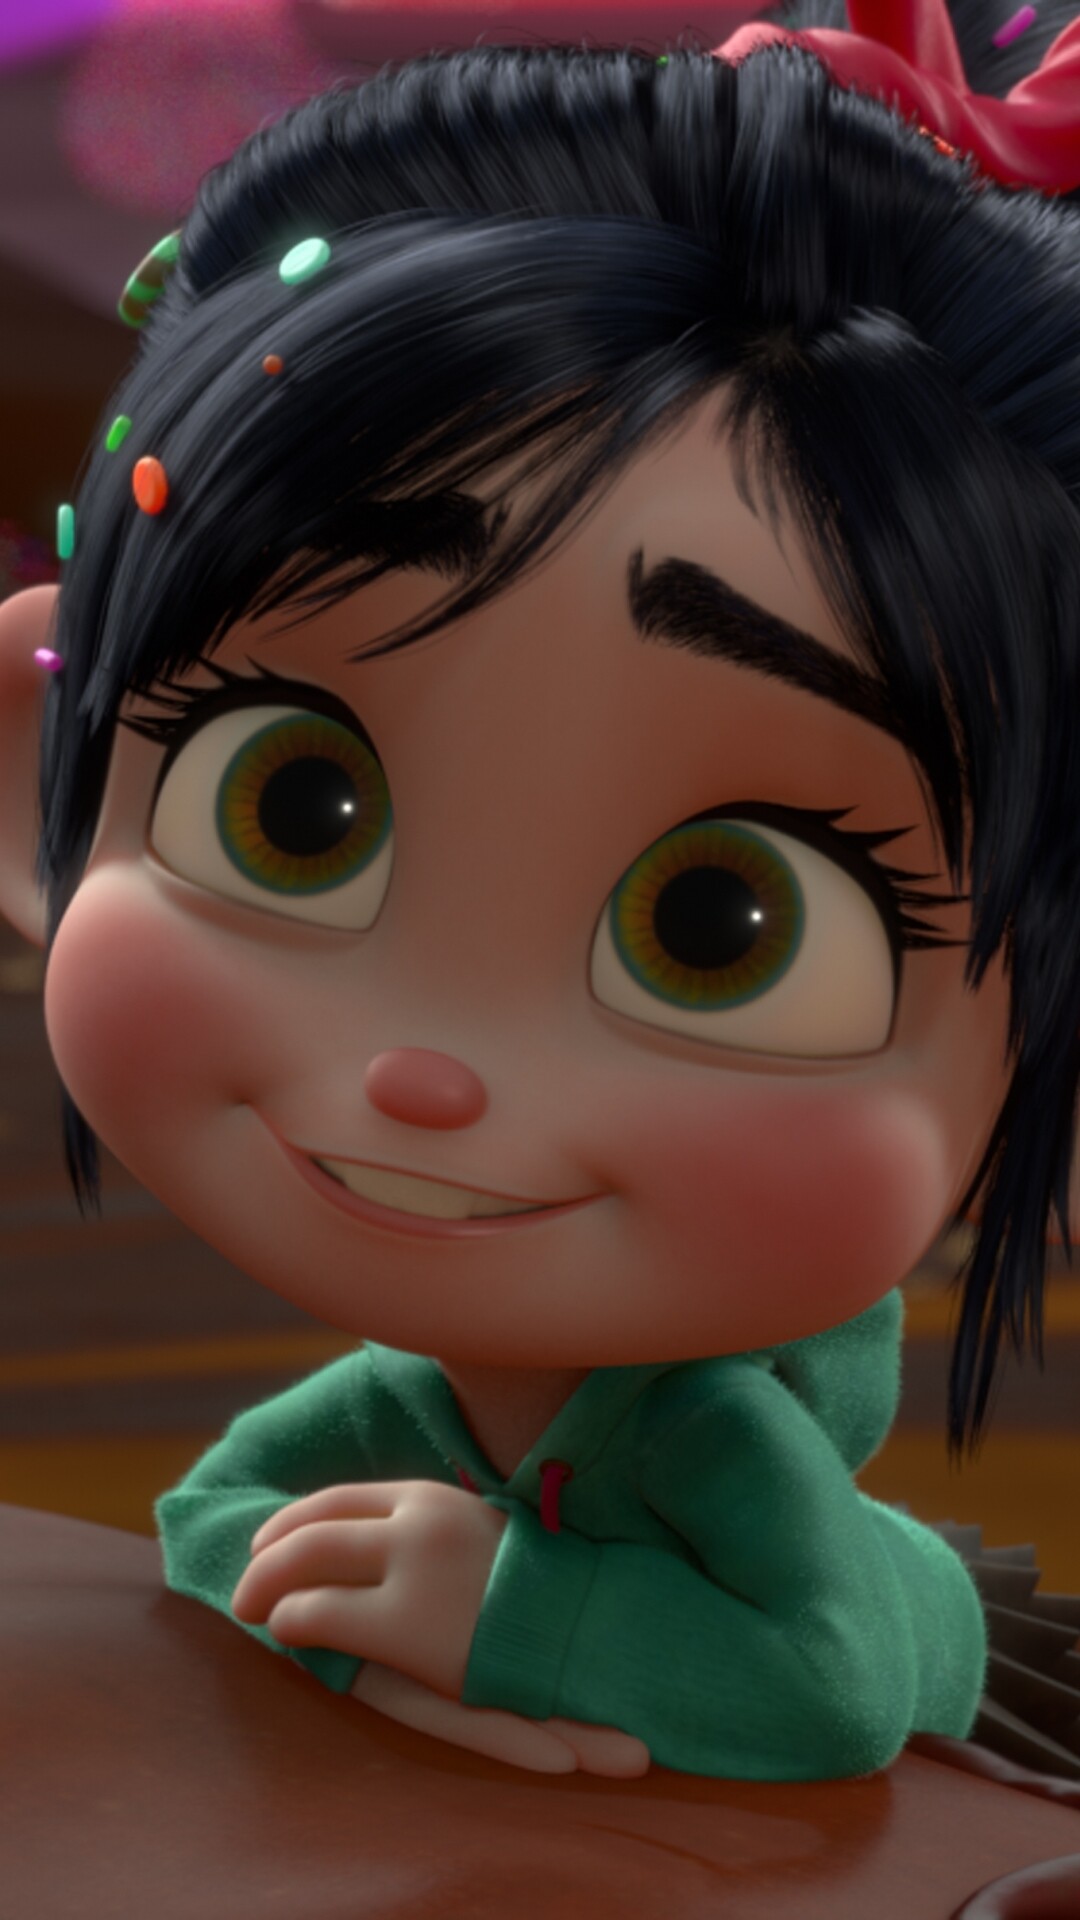 Wreck-It Ralph: Originally the princess of the Sugar Rush game, she called herself the president. 1080x1920 Full HD Wallpaper.